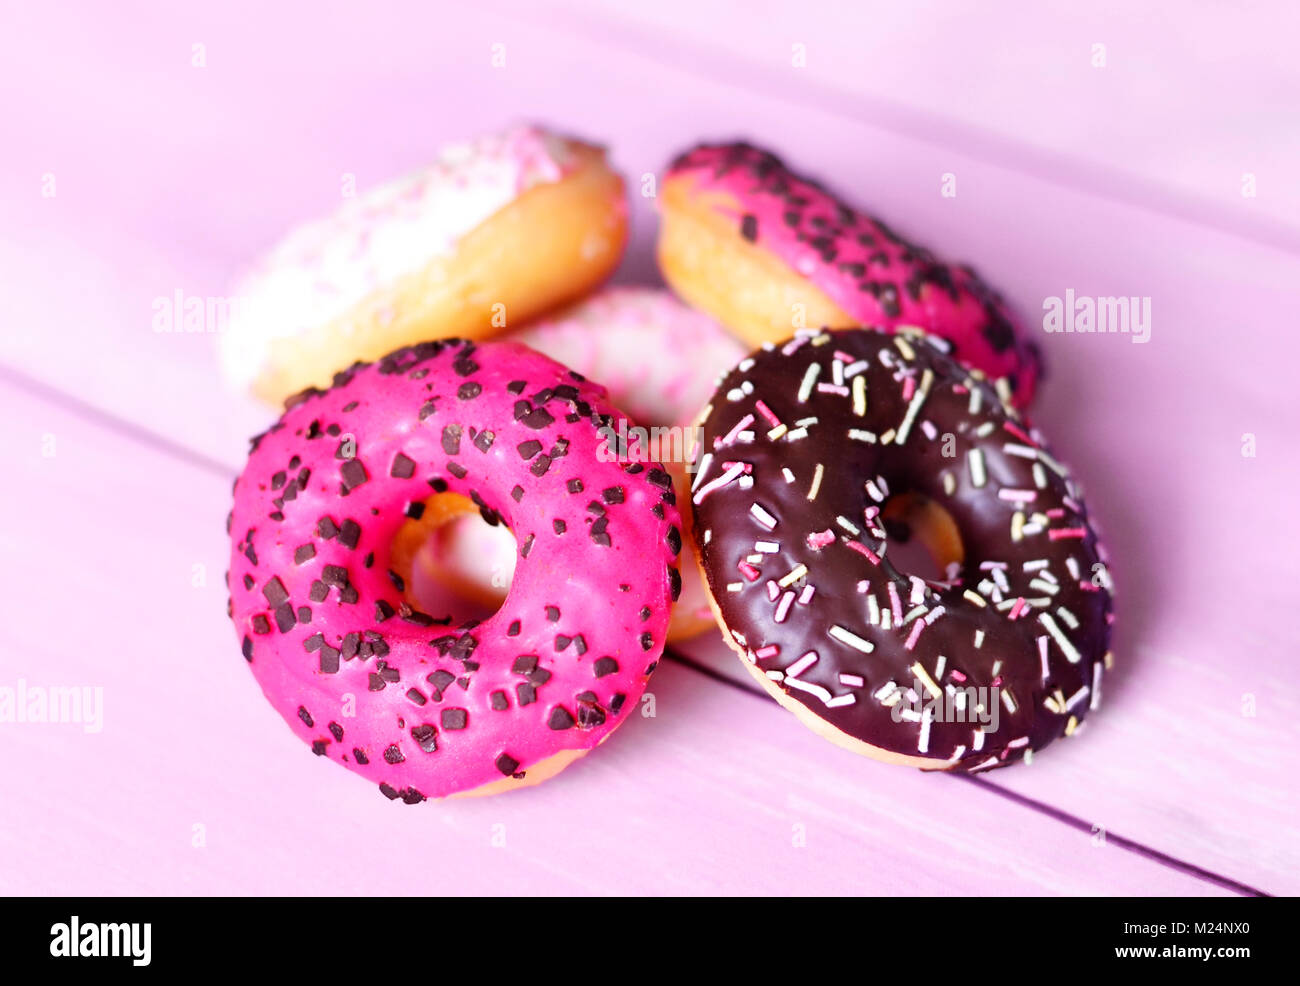 Delicious glazed donuts with sprinkles. Pink table and arrangement of chocolate donuts, various donuts, sweet food or unhealthy eating scene. Stock Photo